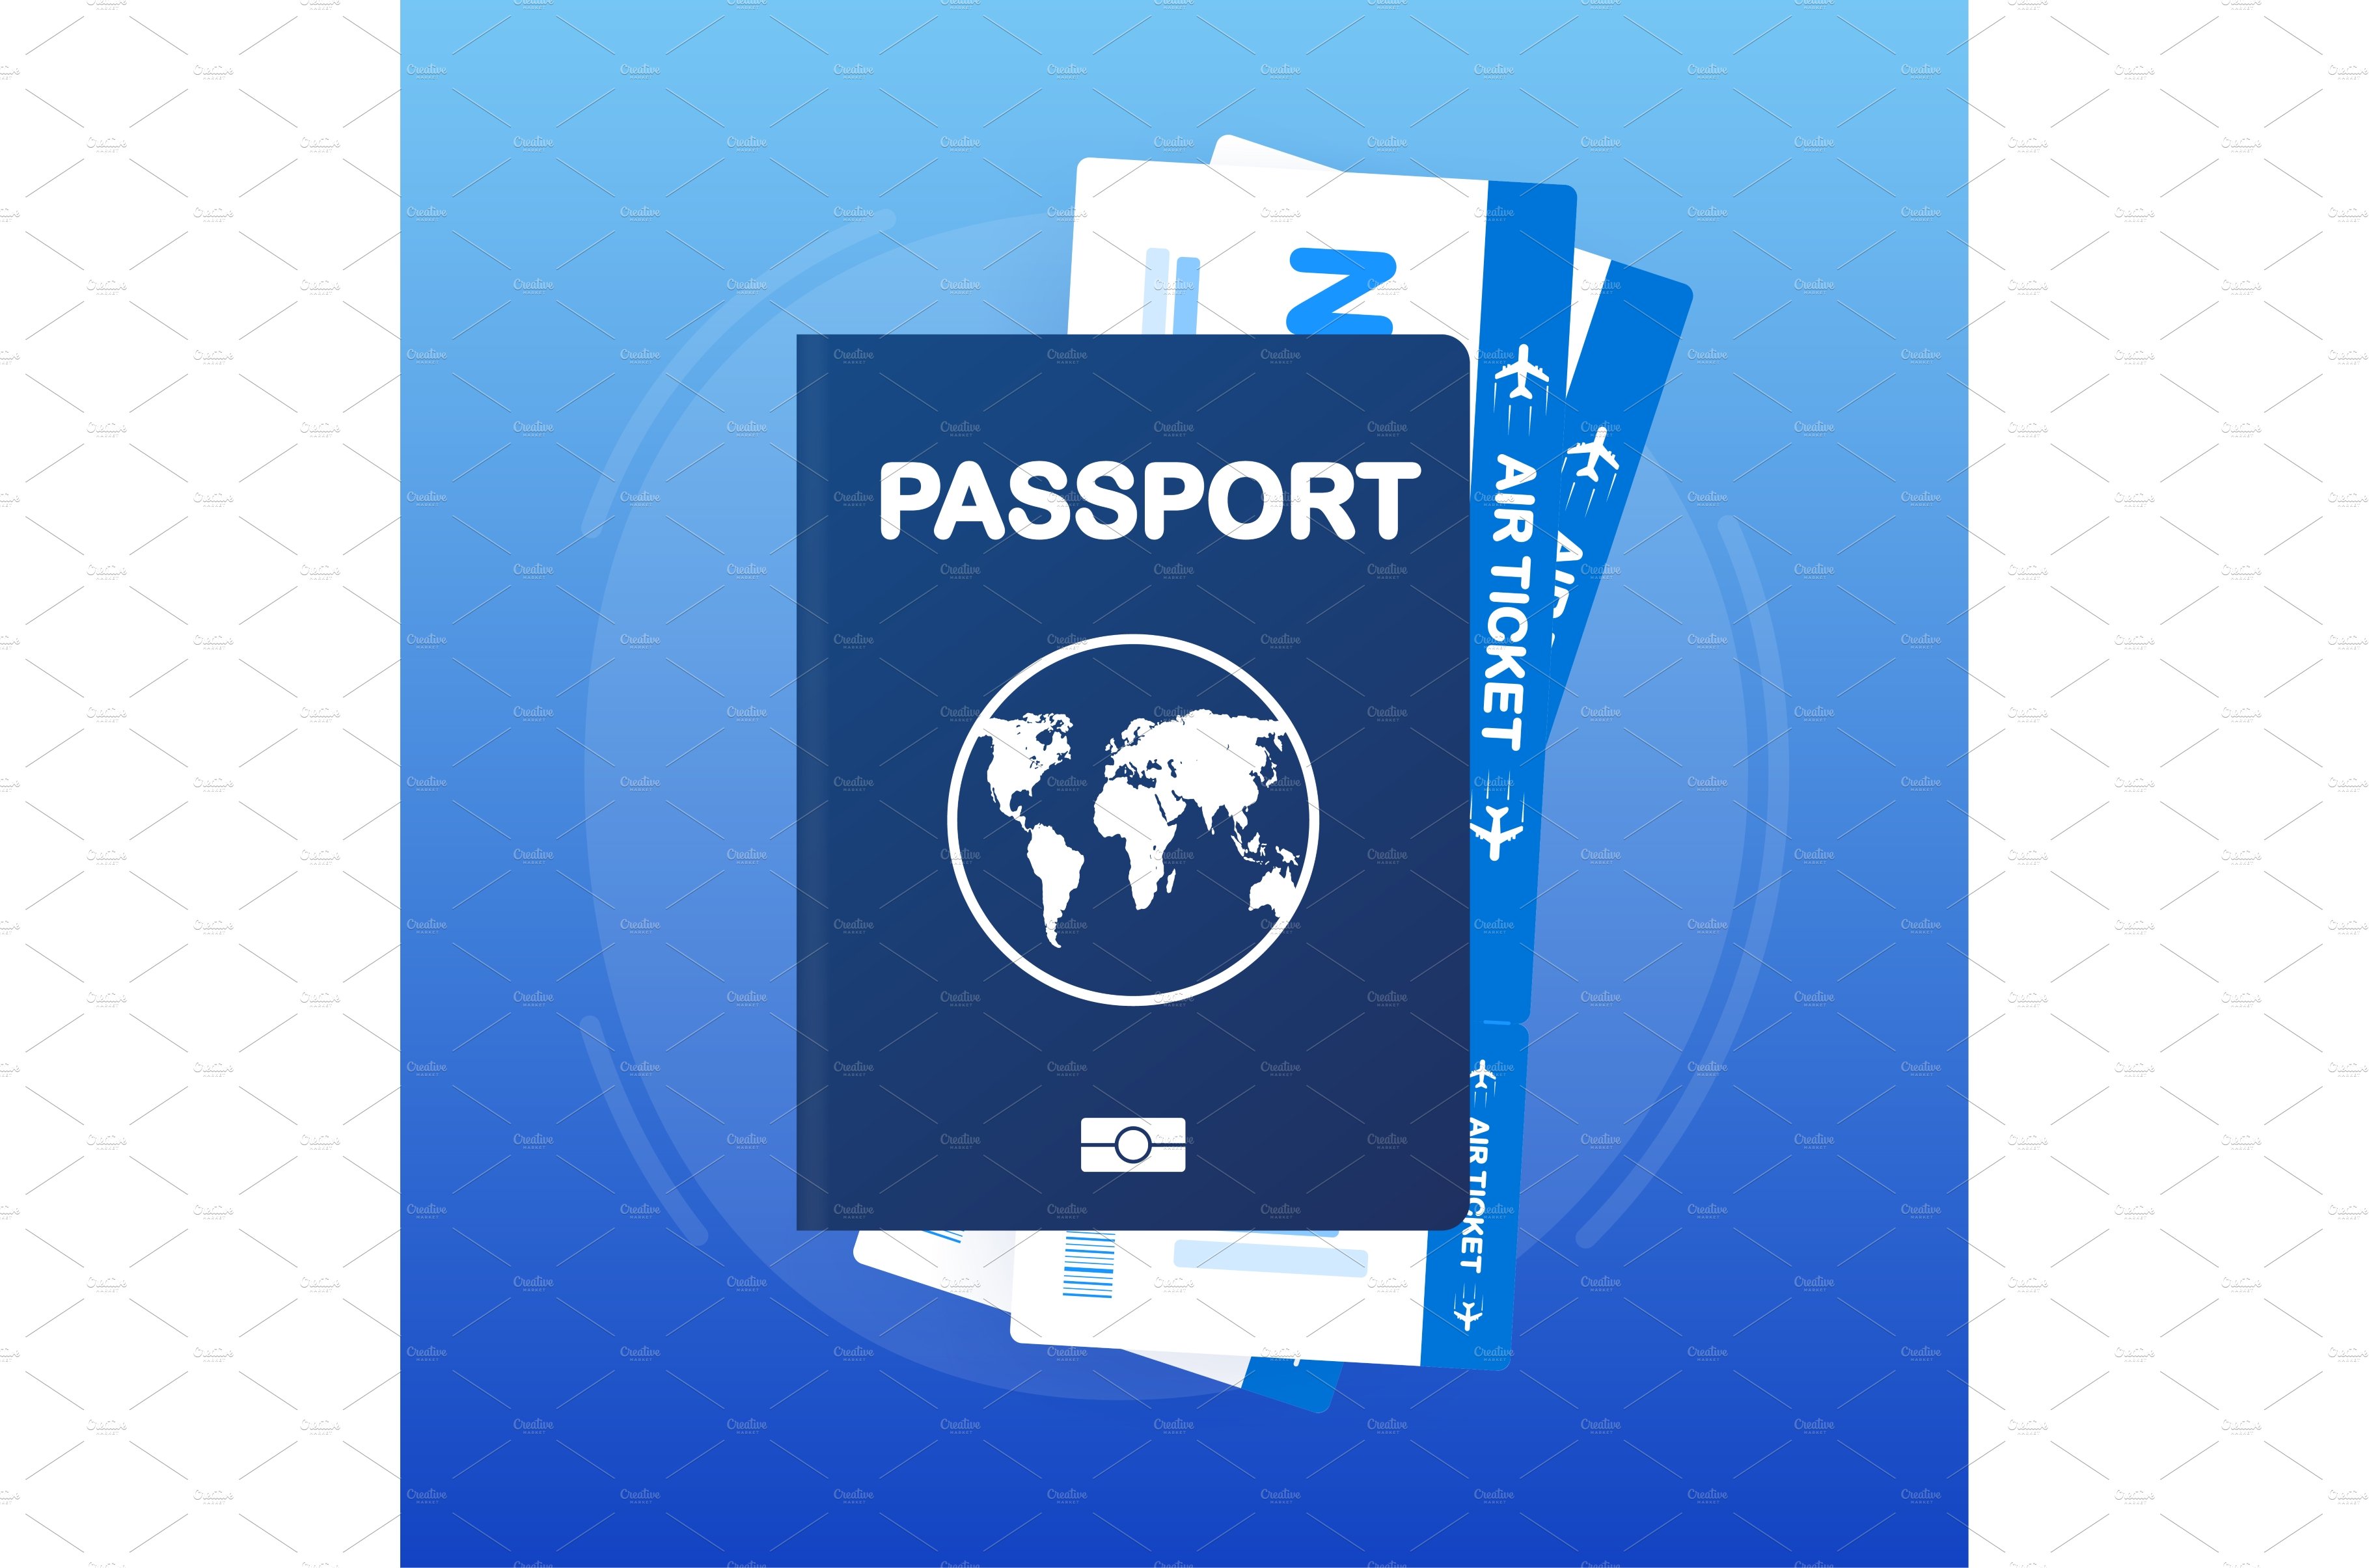 Passport and boarding pass isolated cover image.